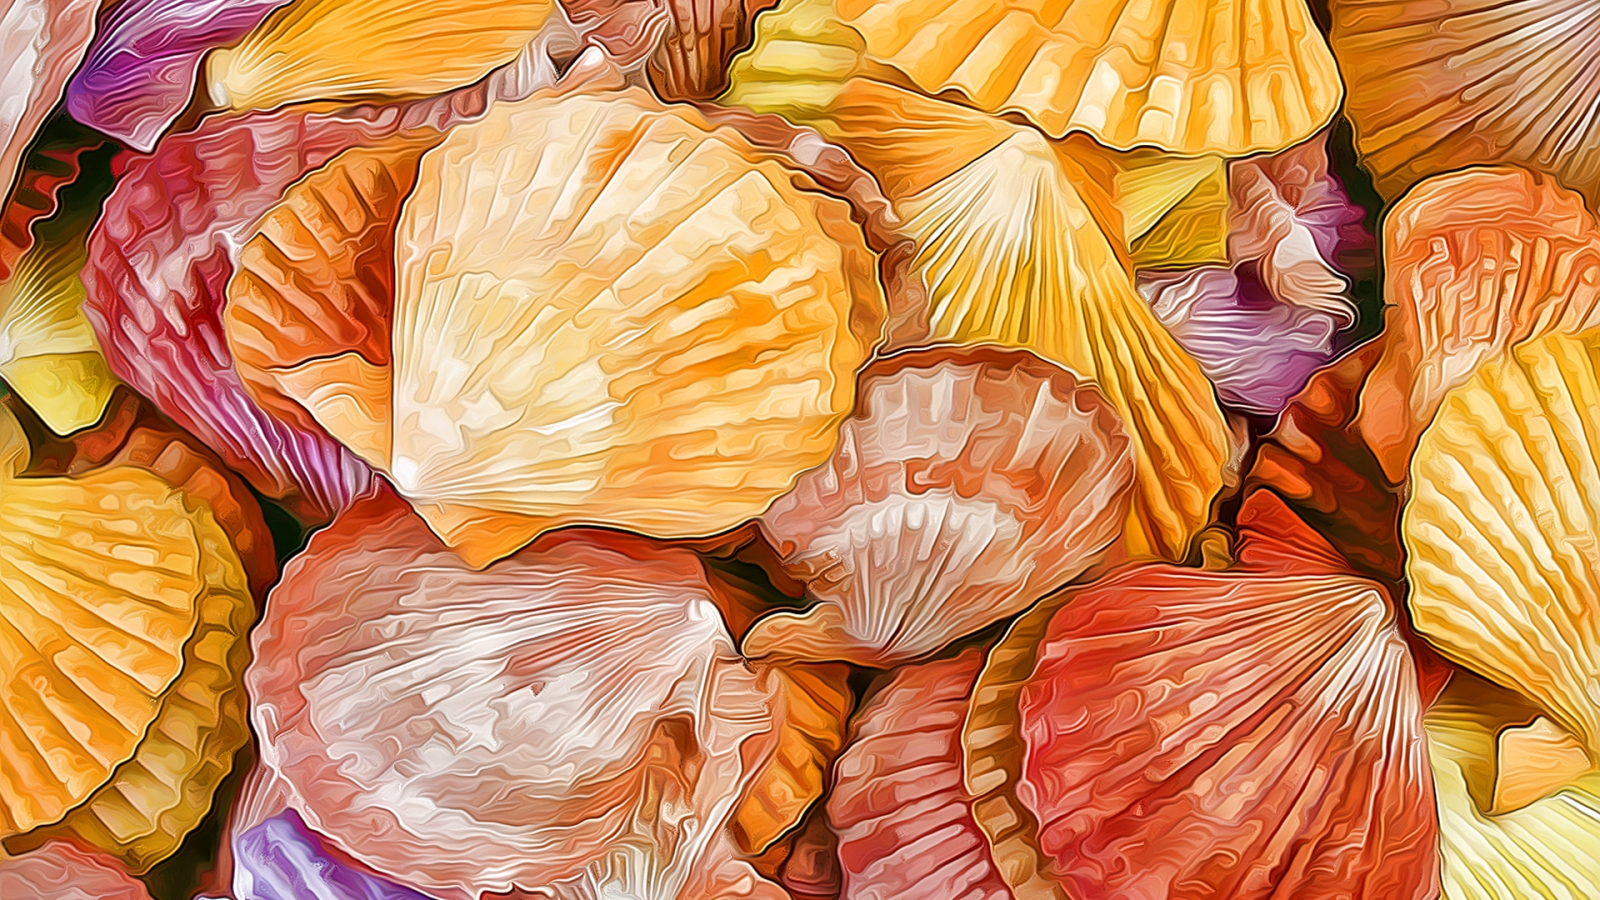 Shells Texture for 1600 x 900 HDTV resolution